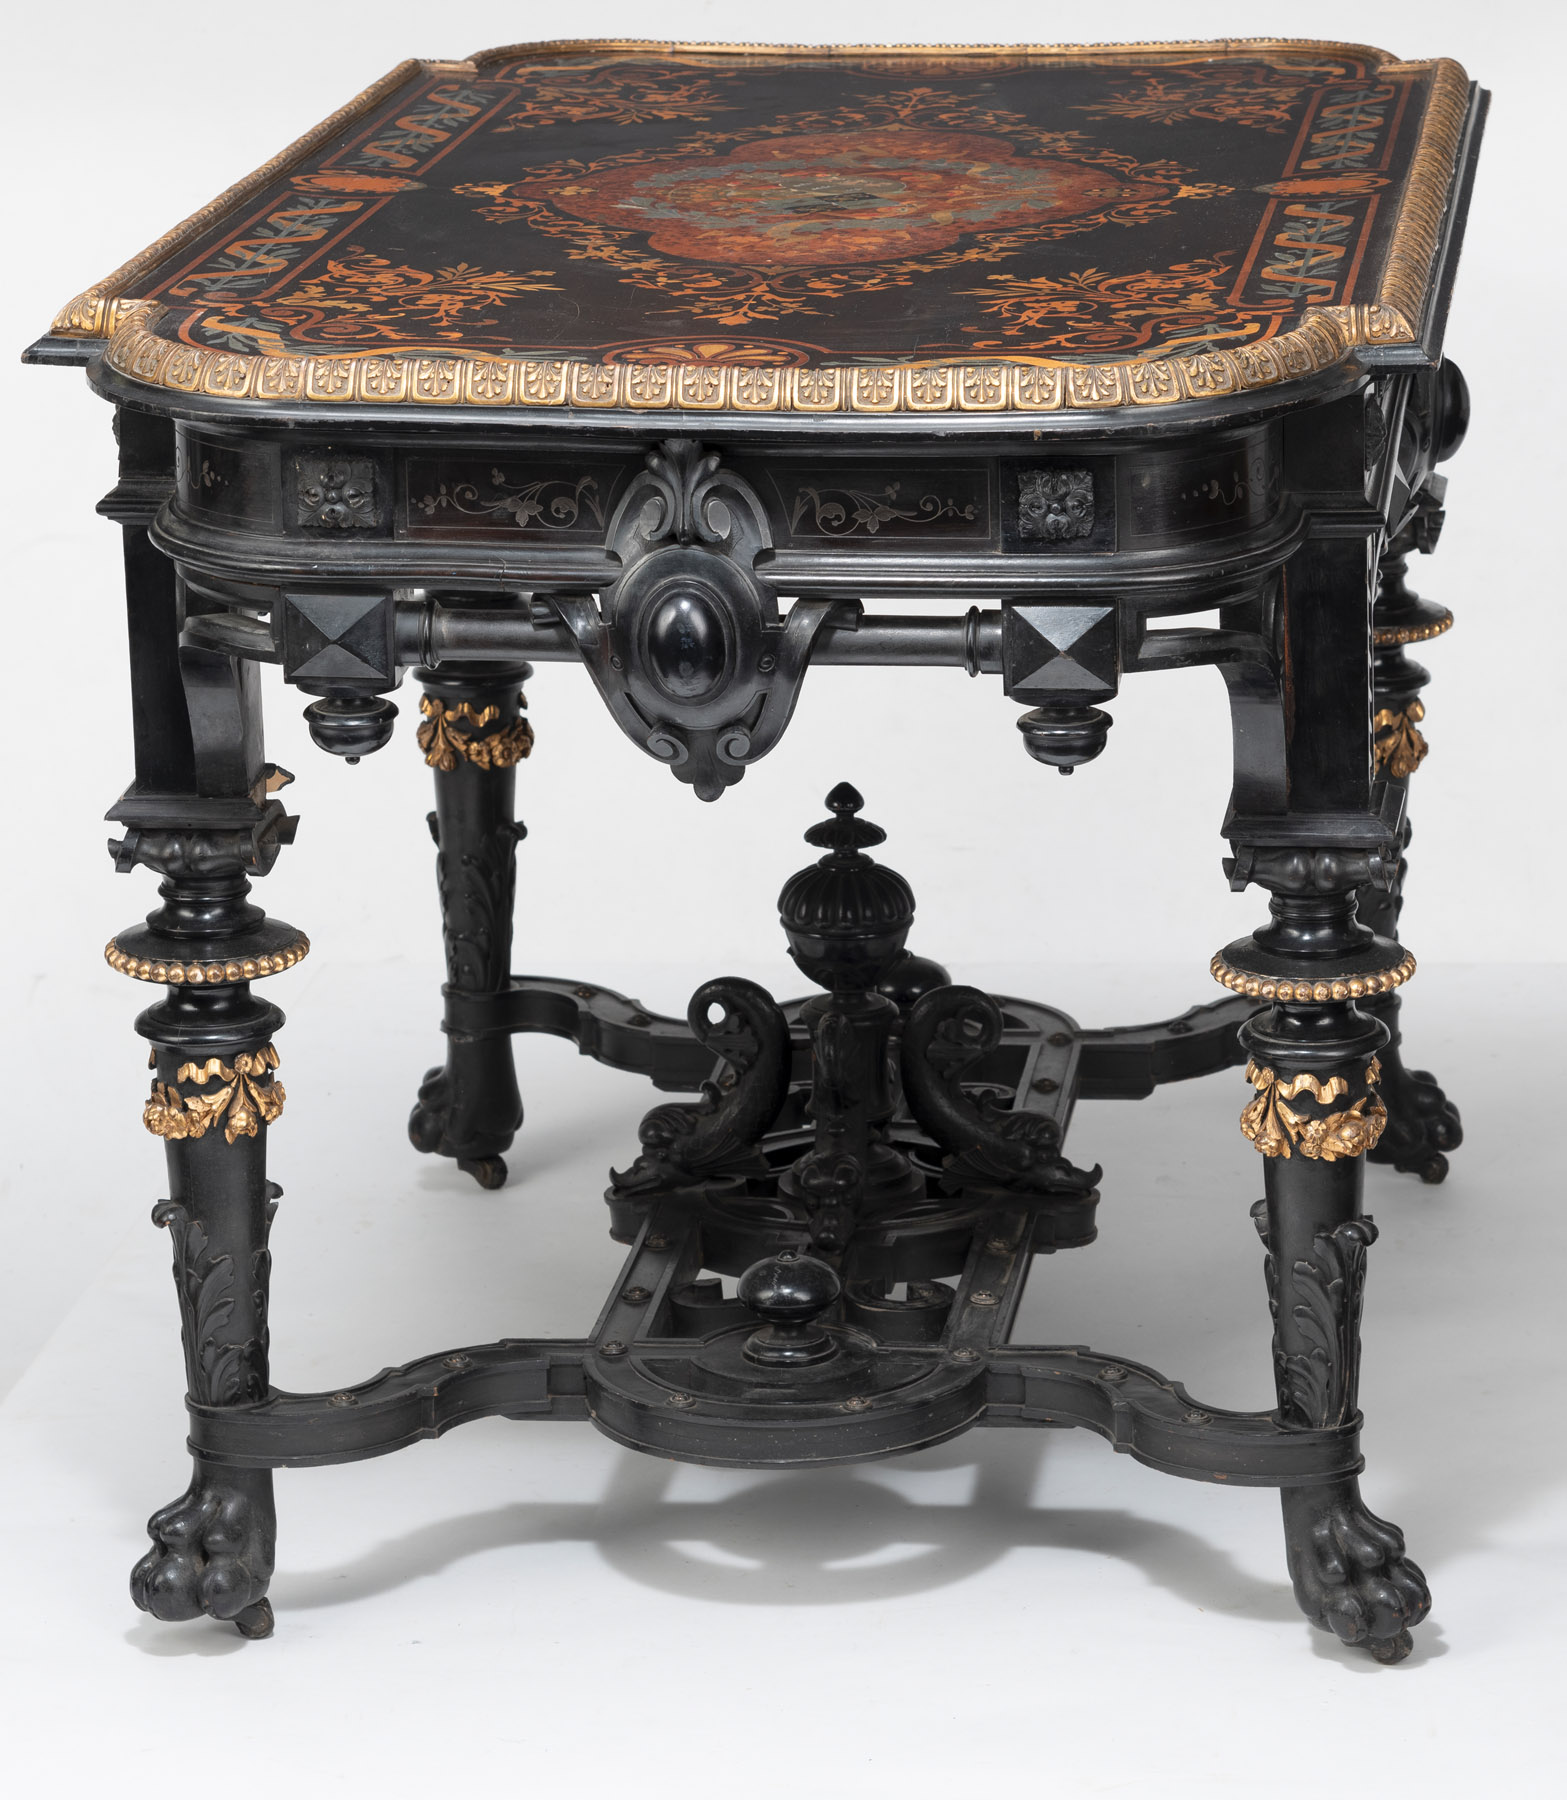 Magnificent centre table with the alliance coat of arms of Agnes von Württemberg and Prince Heinric - Image 9 of 11